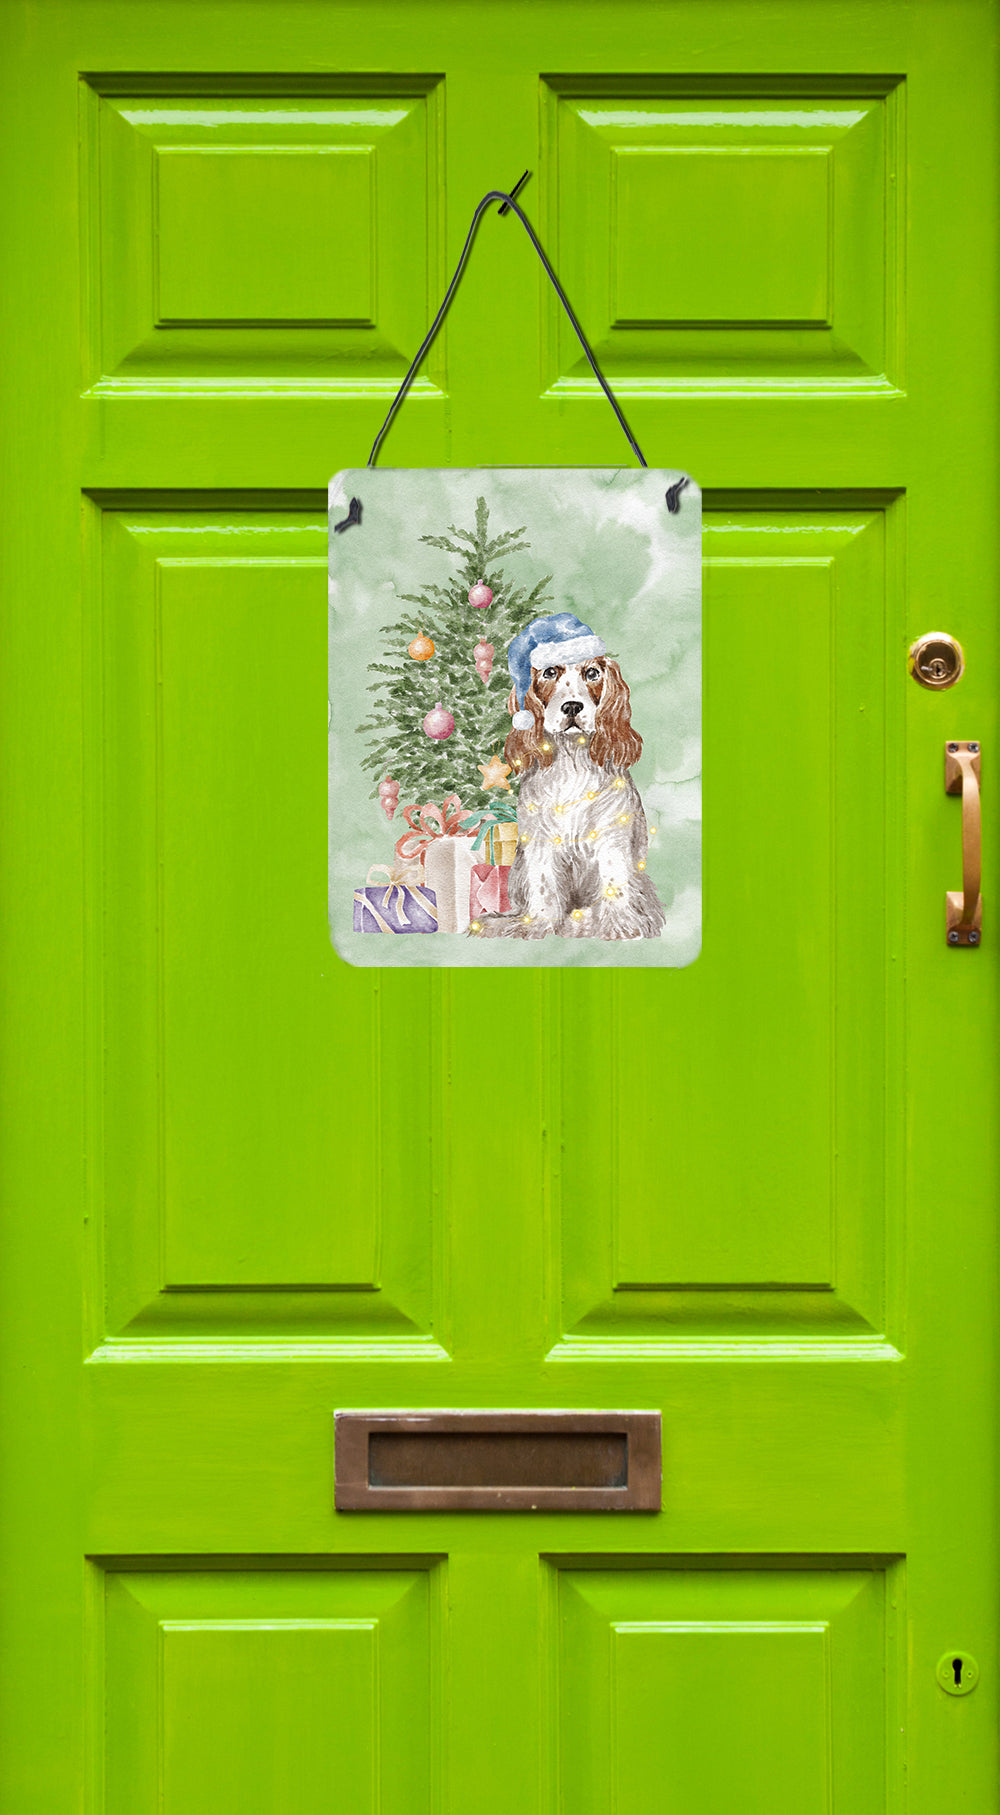 Buy this Christmas English Cocker Spaniel Red White Wall or Door Hanging Prints